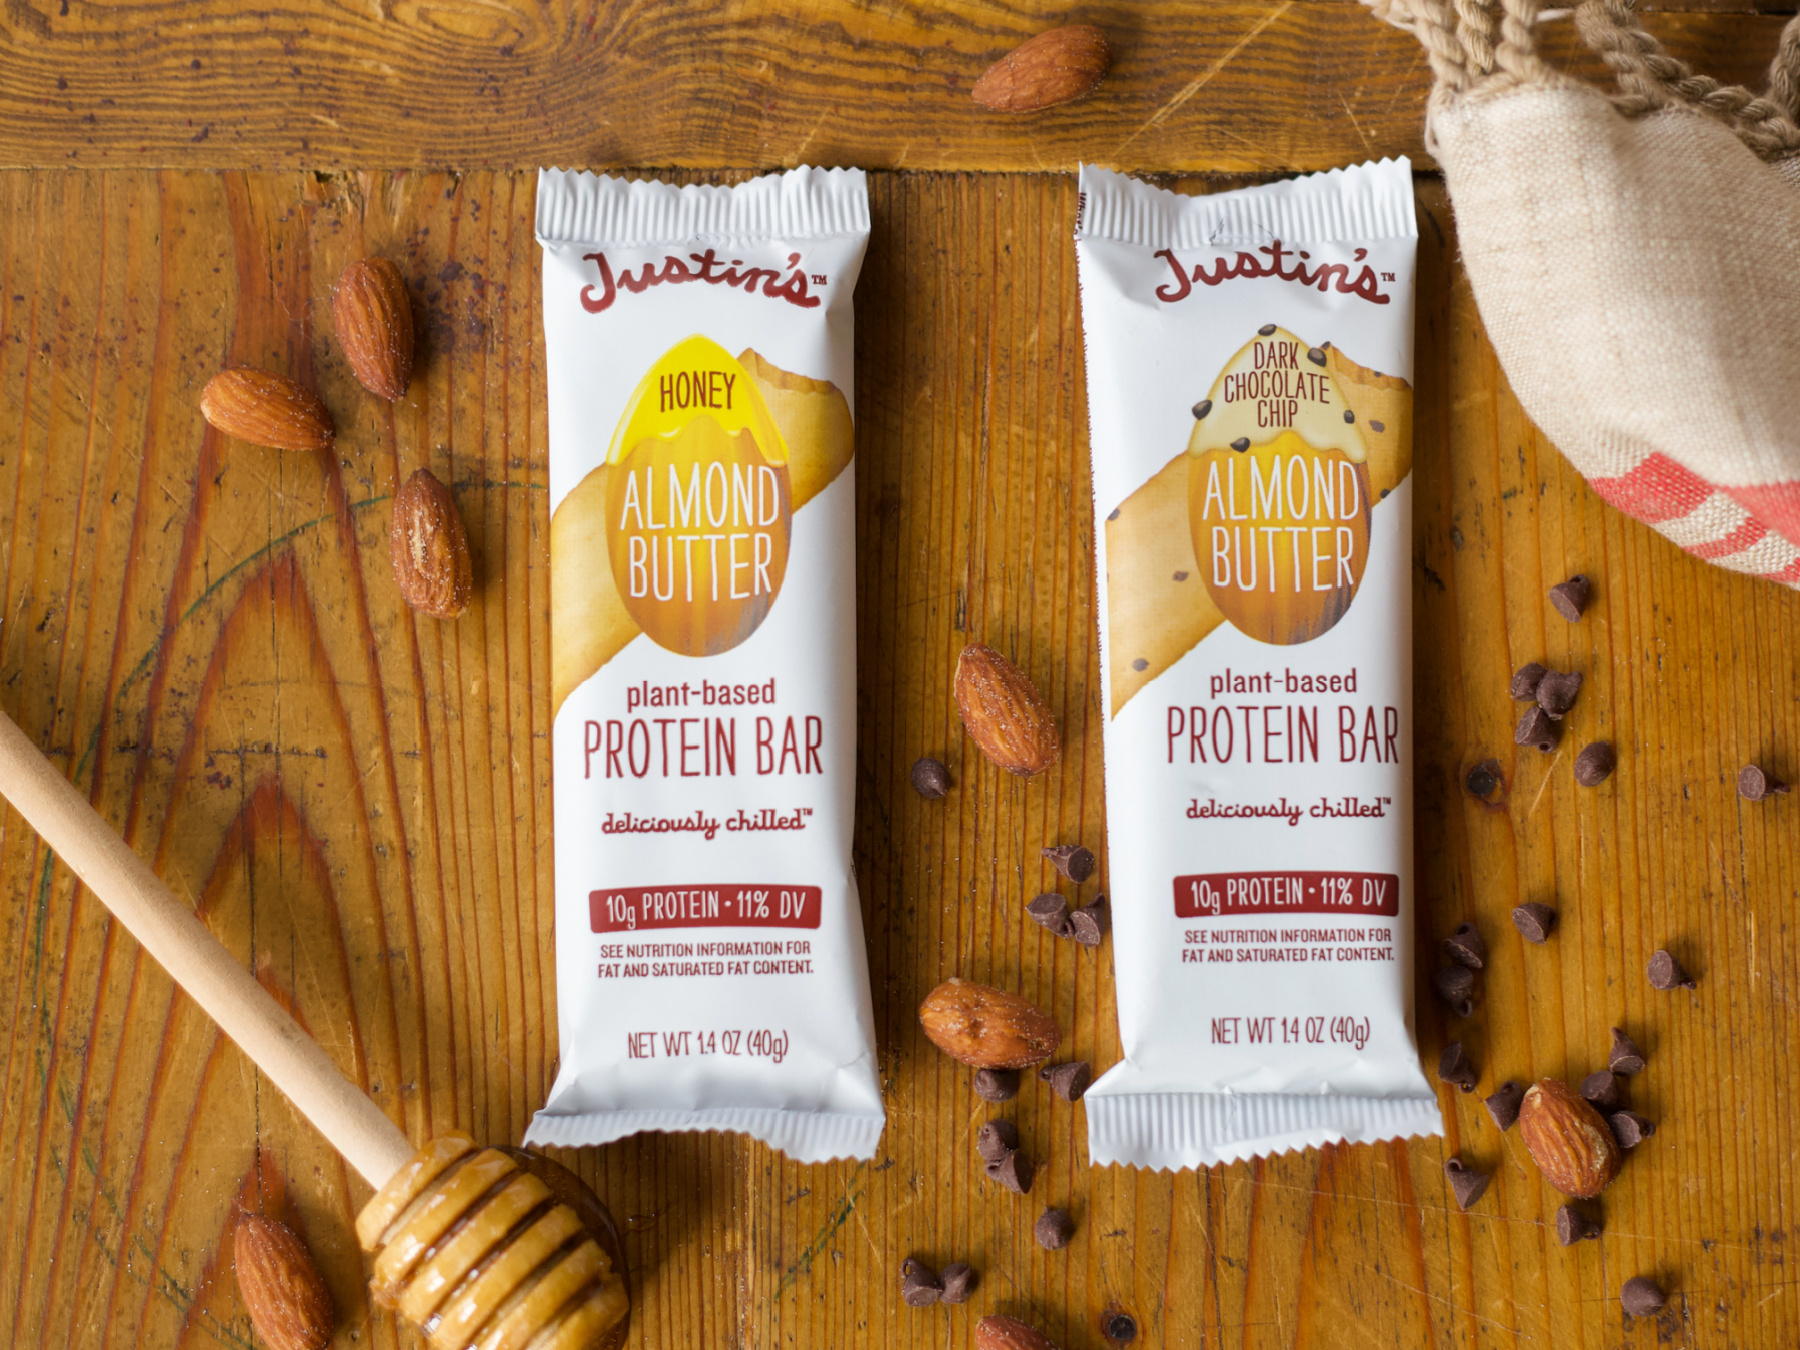 Get Your Favorite Justin’s Refrigerated Protein Bar For FREE At Kroger